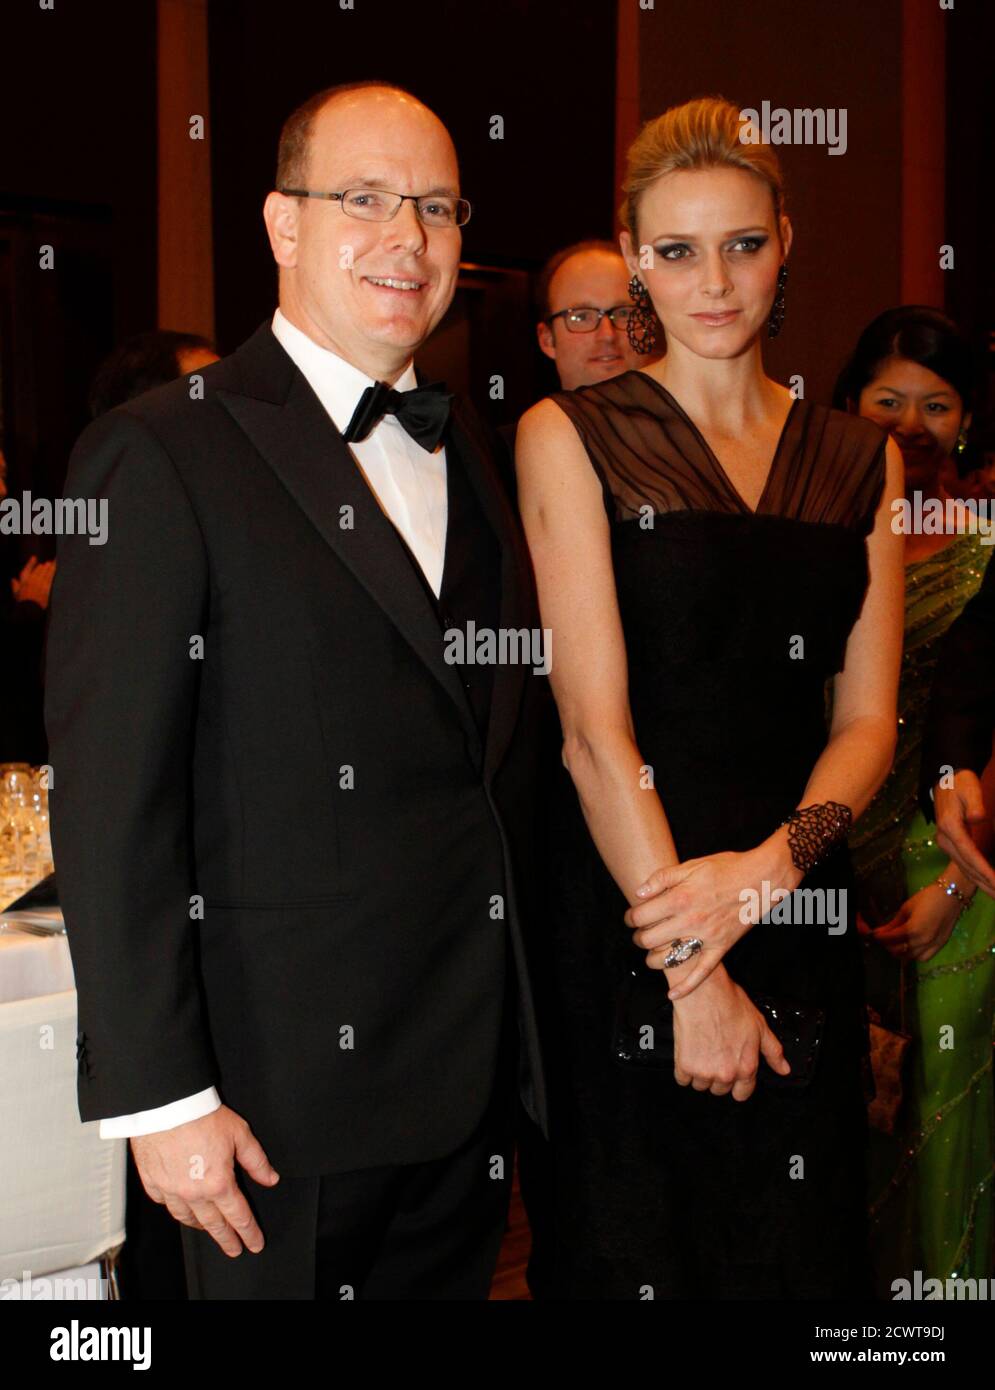 Monaco's Prince Albert II (L) and his fiancee Charlene Wittstock (C) arrive at a gala dinner hosted by BirdLife International in Tokyo October 29, 2010. REUTERS/Issei Kato (JAPAN - Tags: ROYALS SOCIETY) Stock Photo